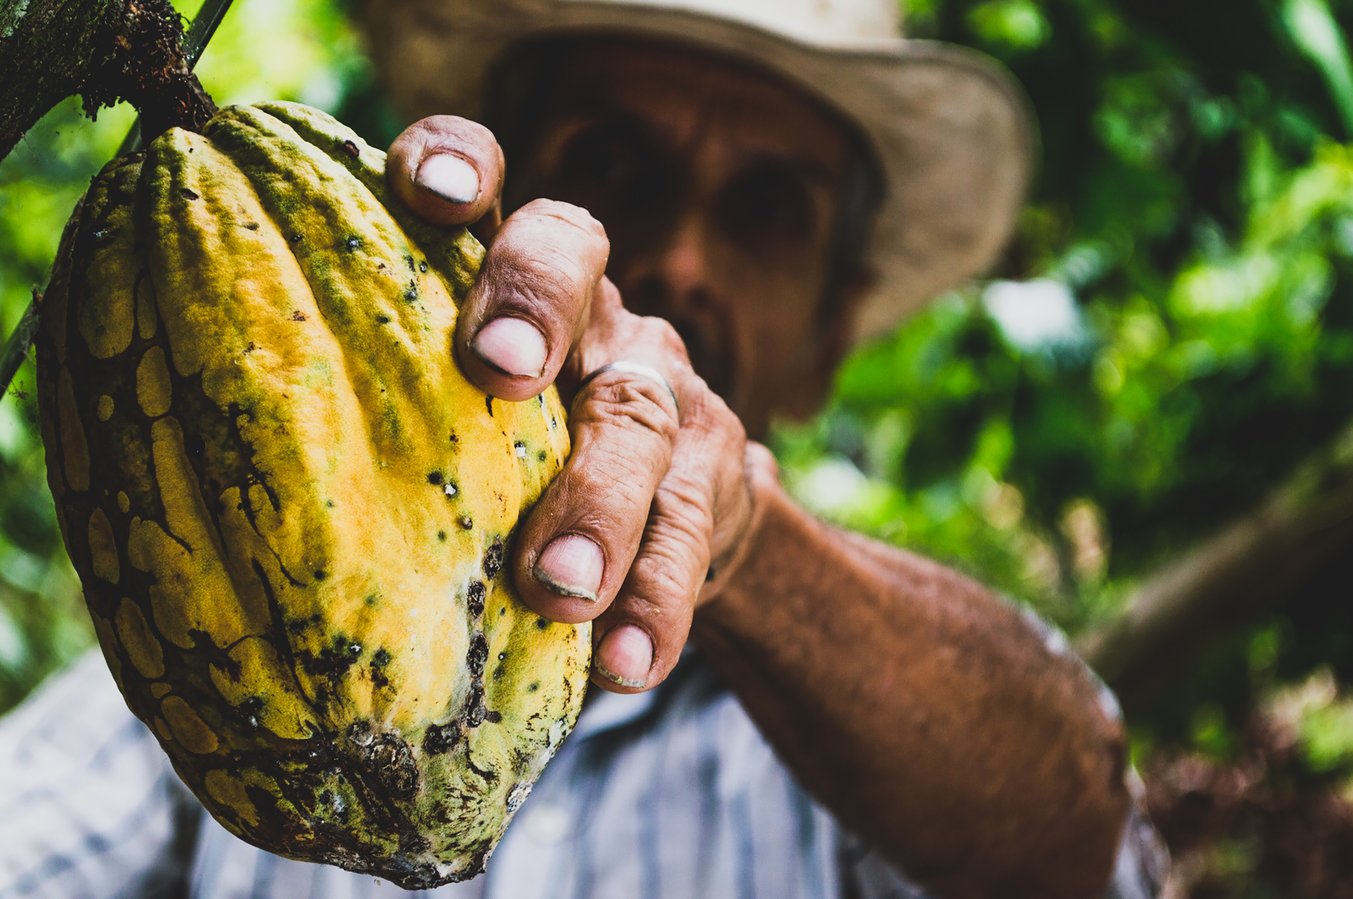 Hand holding raw cacao bean